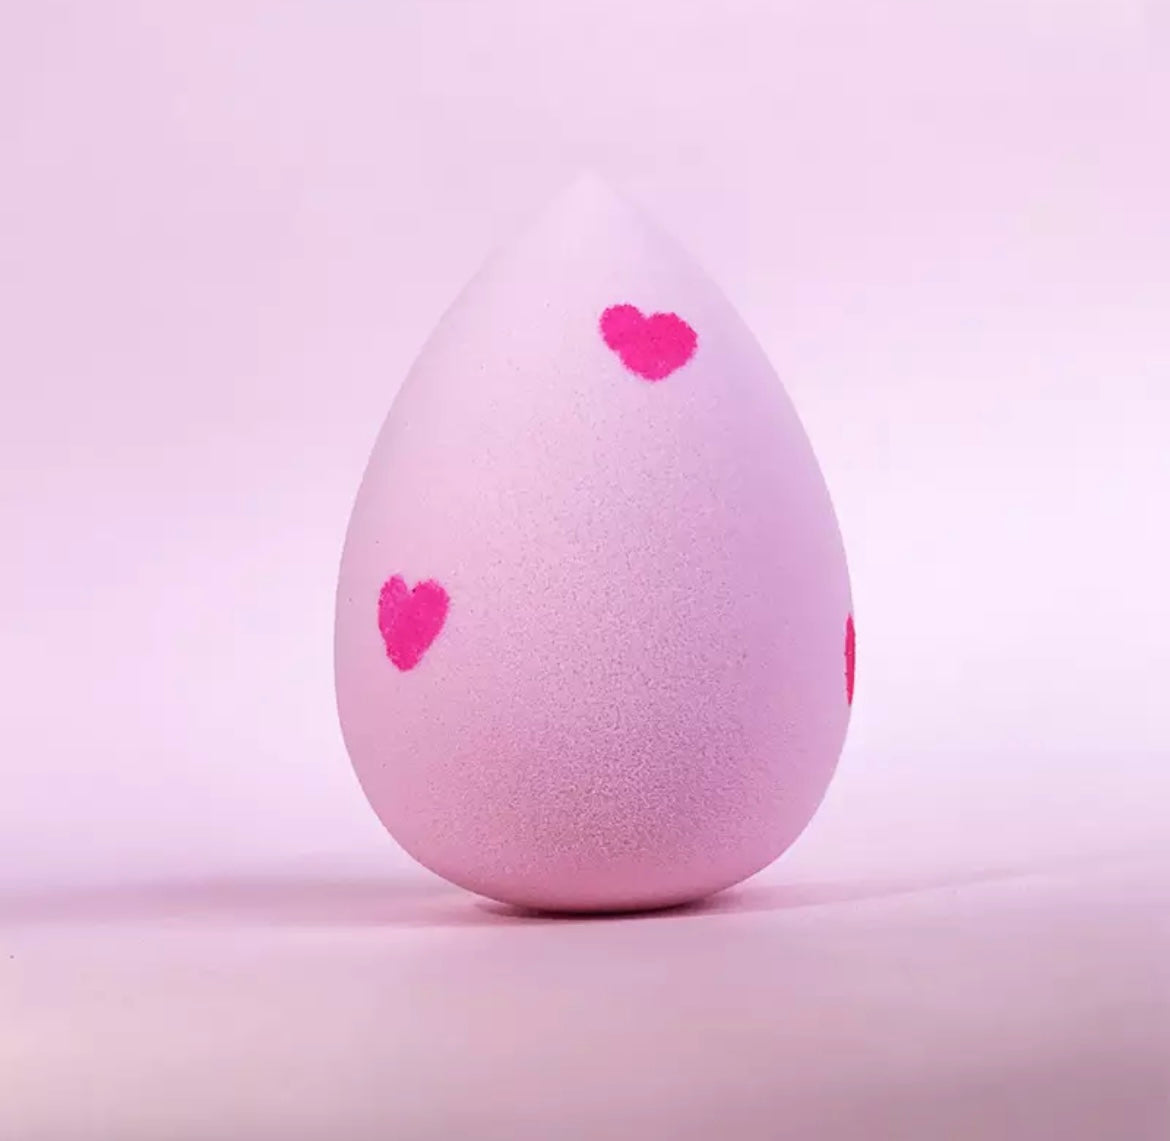 LIMITED EDITION Your Mine Pink Heart Beauty Bouncer Sponge